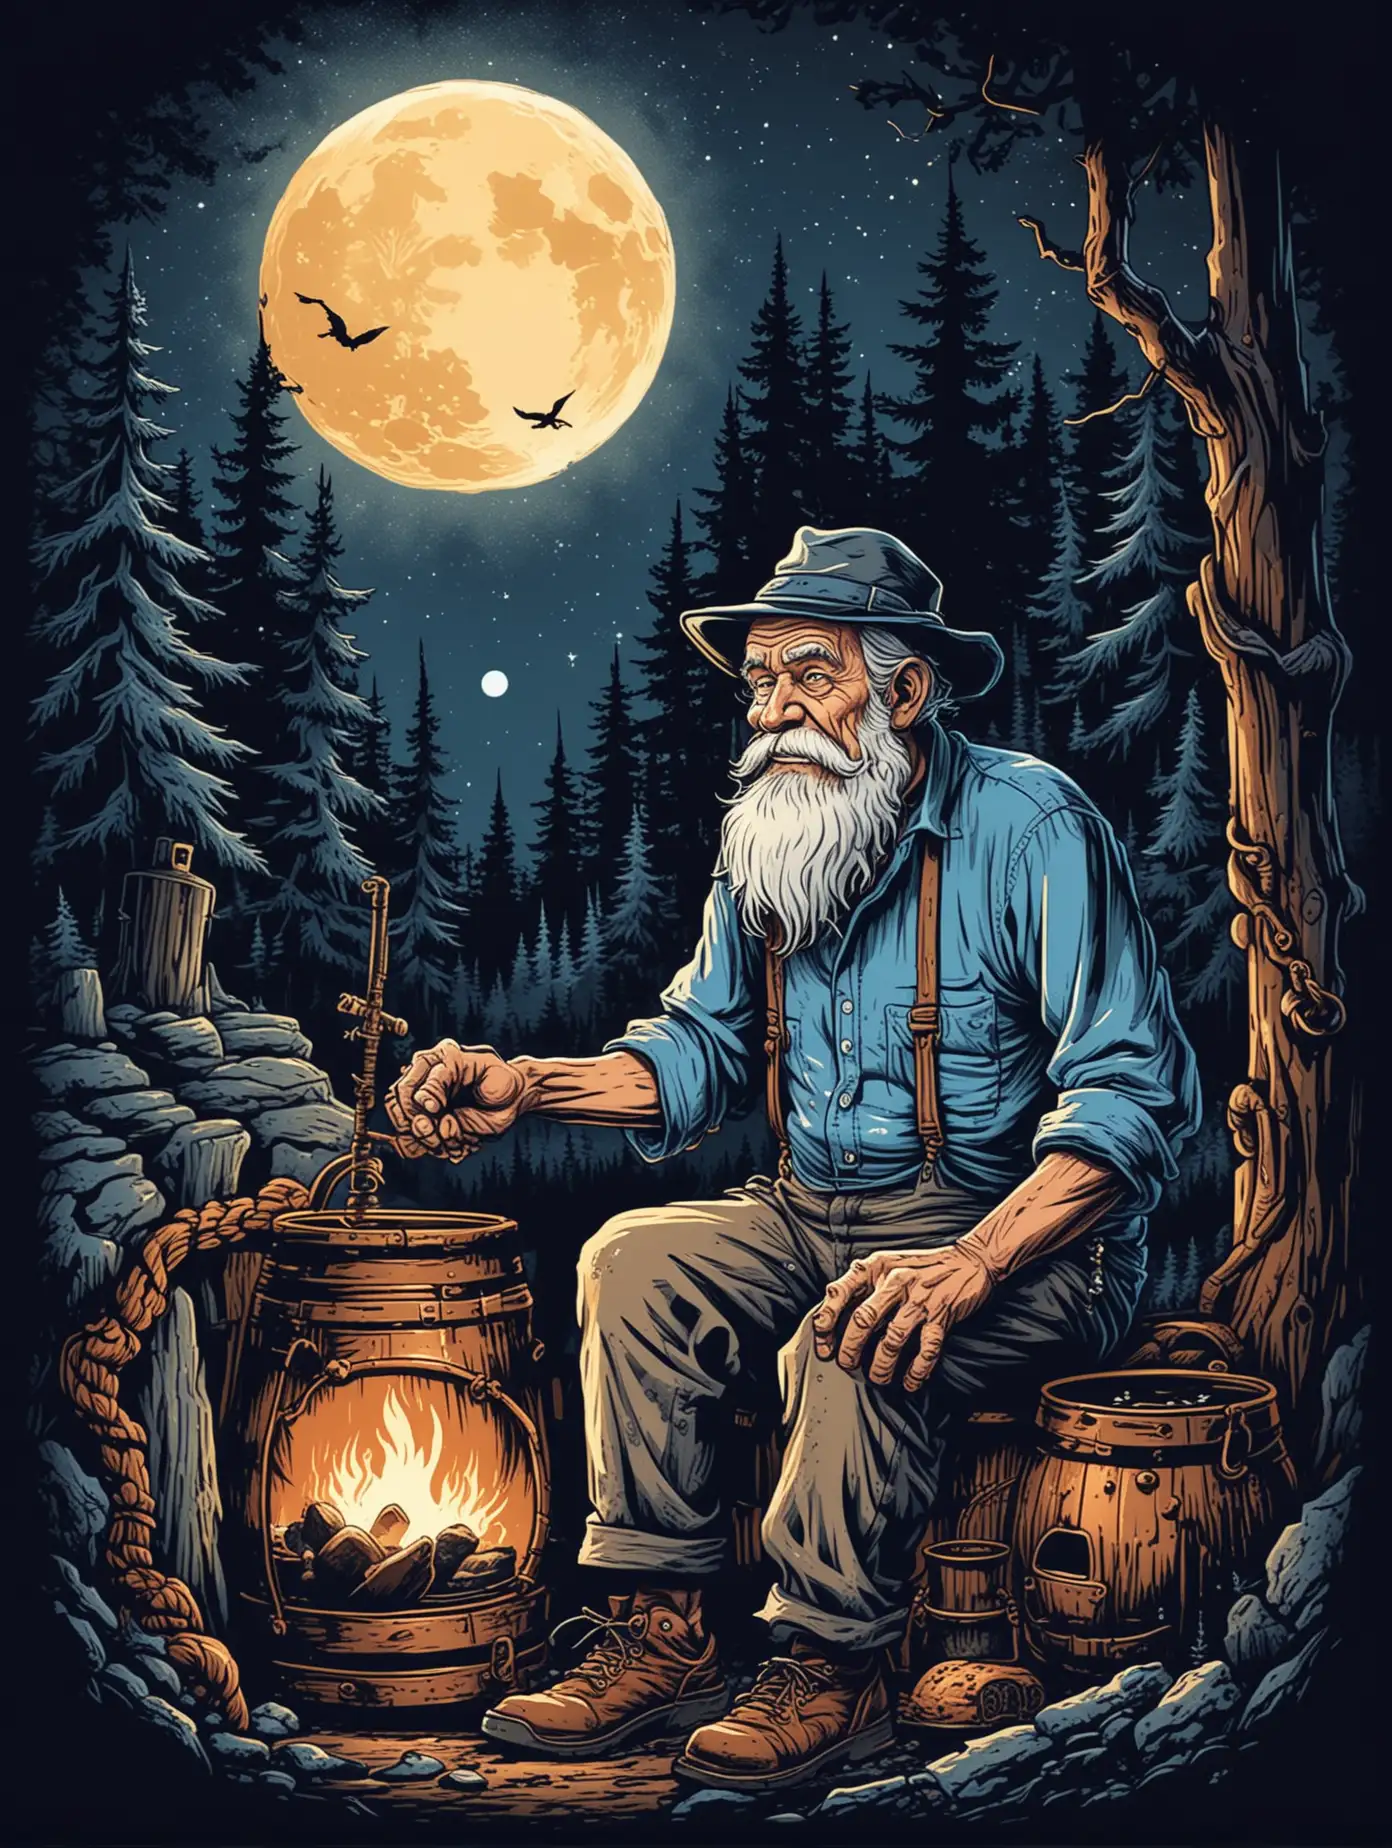 T-shirt cartoon spot color style Design with a Crazy looking old man moonshiner with a night time blue tones look sitting beside a copper coiled Moonshine Still with a fire cooking the pot underneath with bigfoot in the distance bigfoot